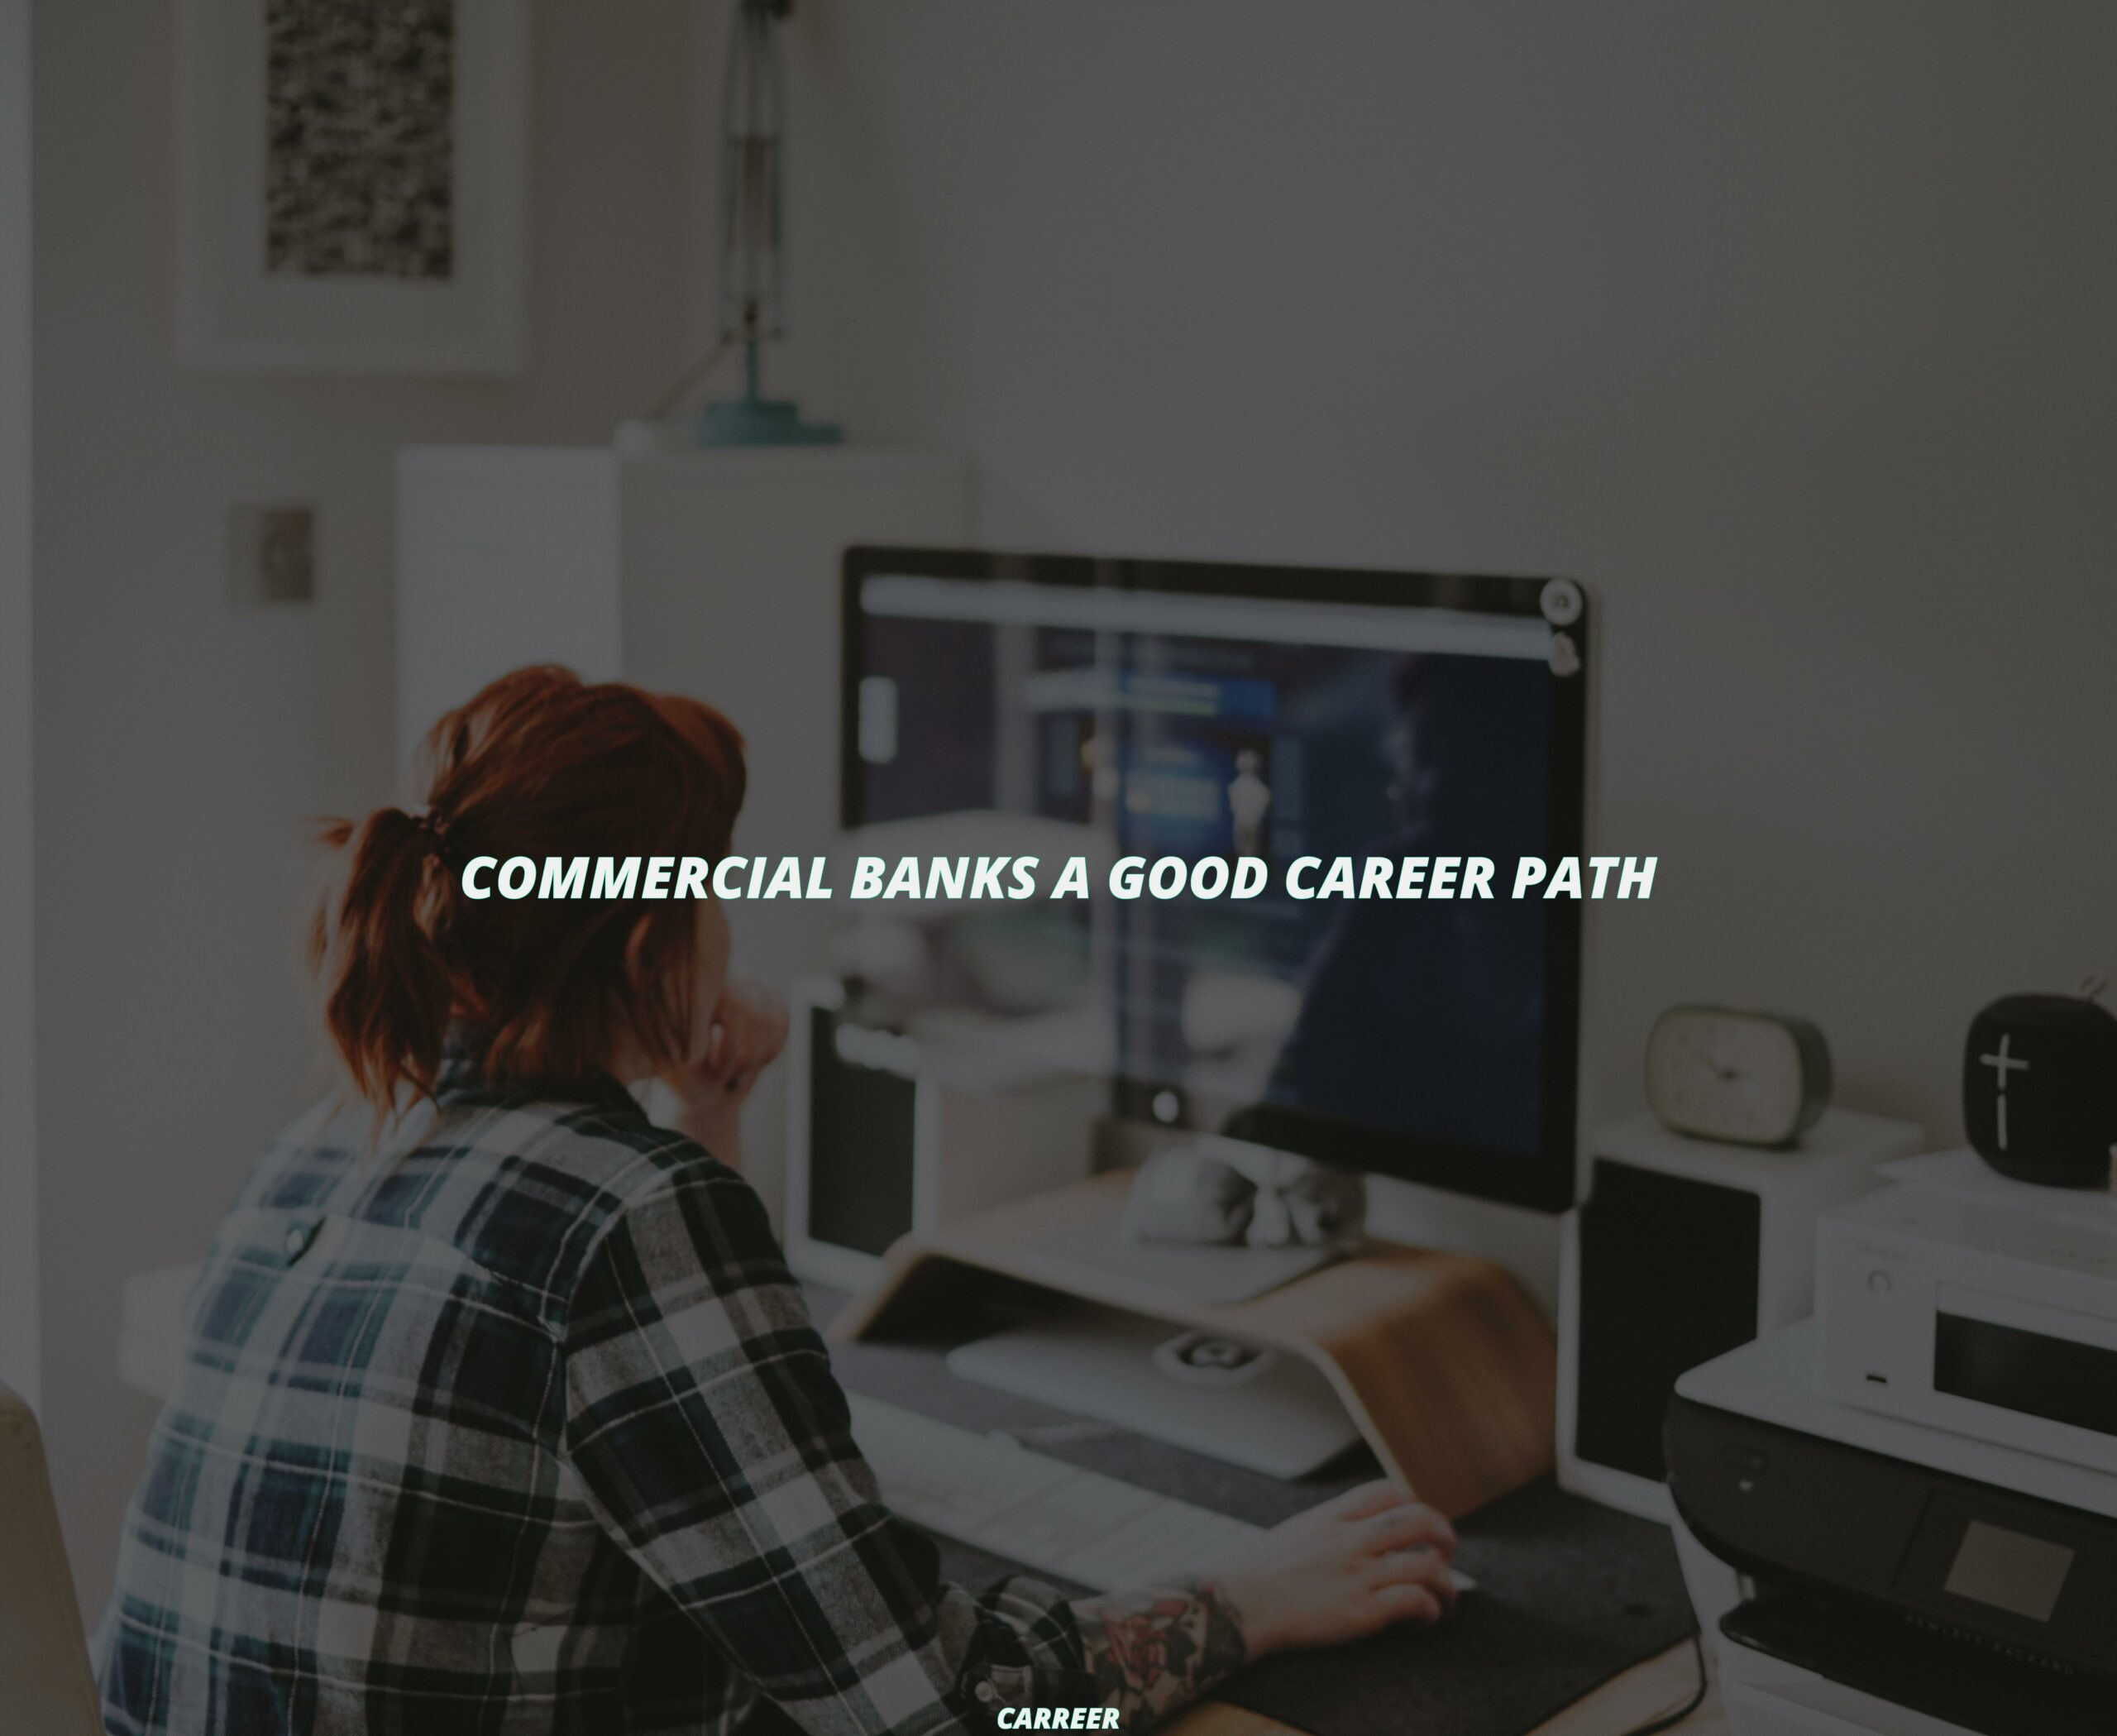 Commercial banks a good career path